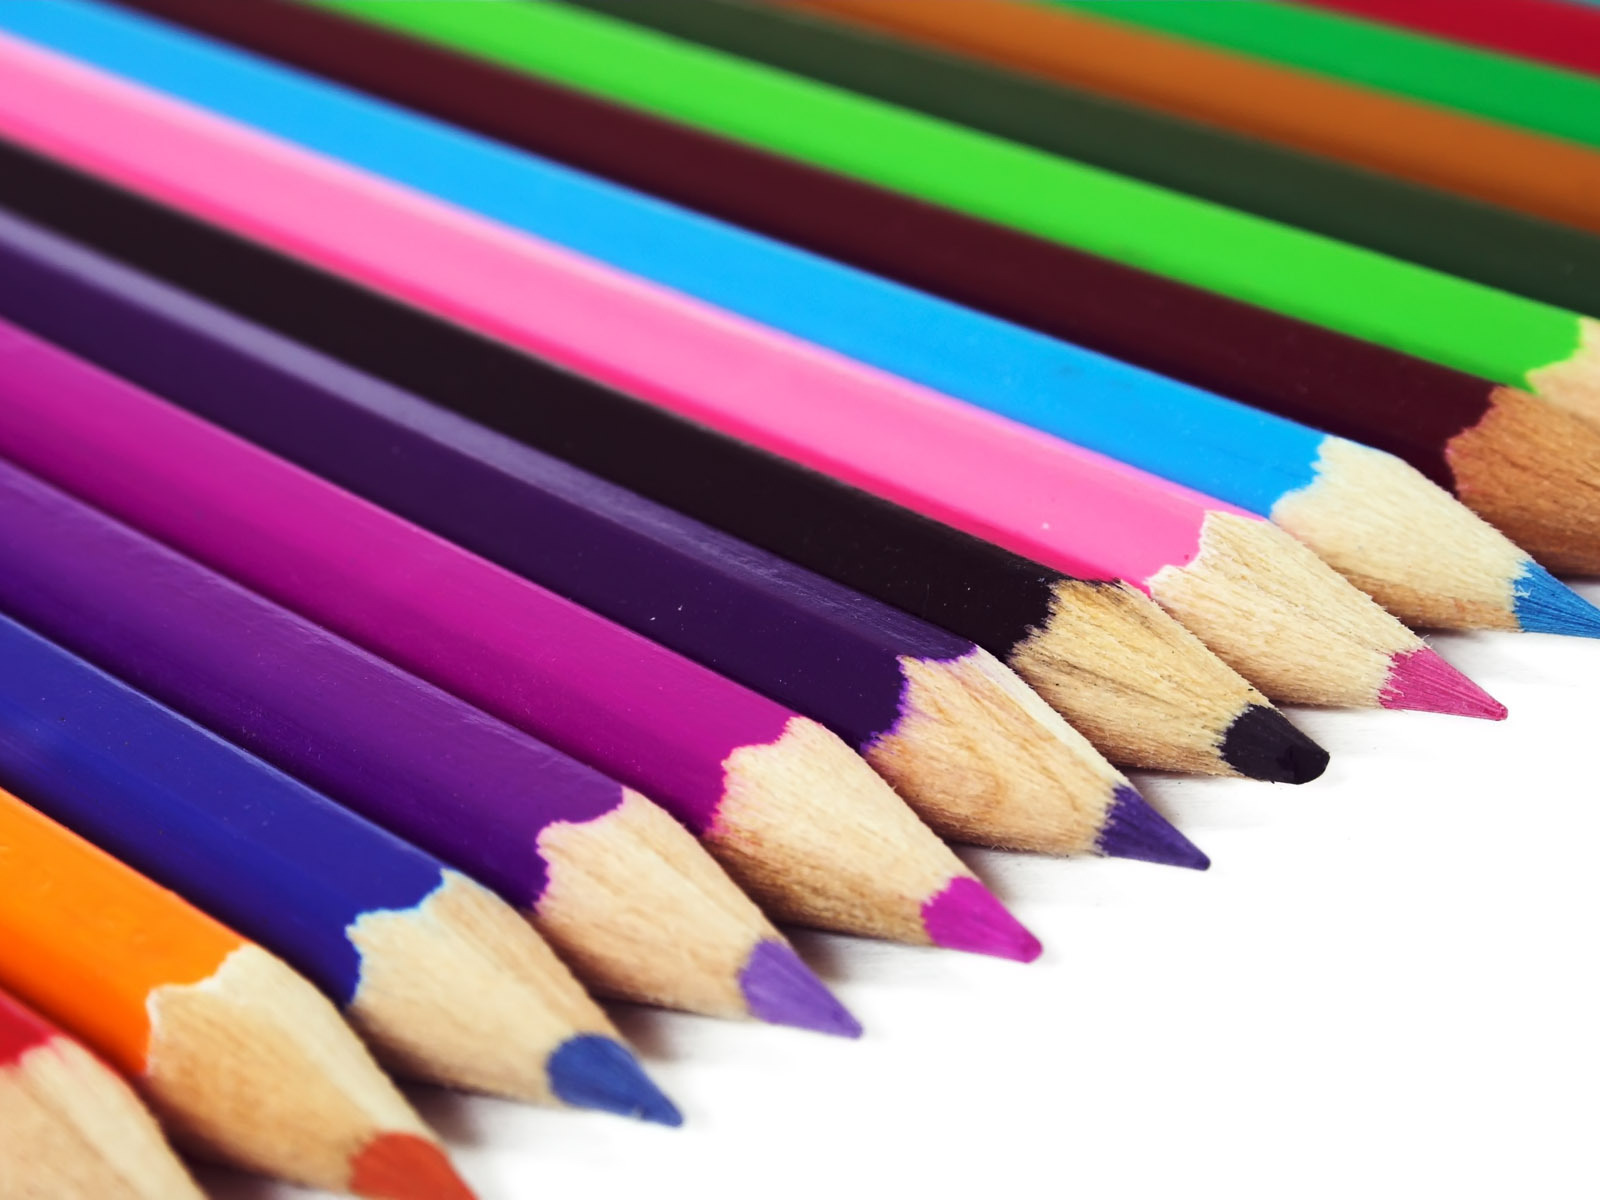 pencil wallpaper,pencil,office supplies,colorfulness,writing implement,material property